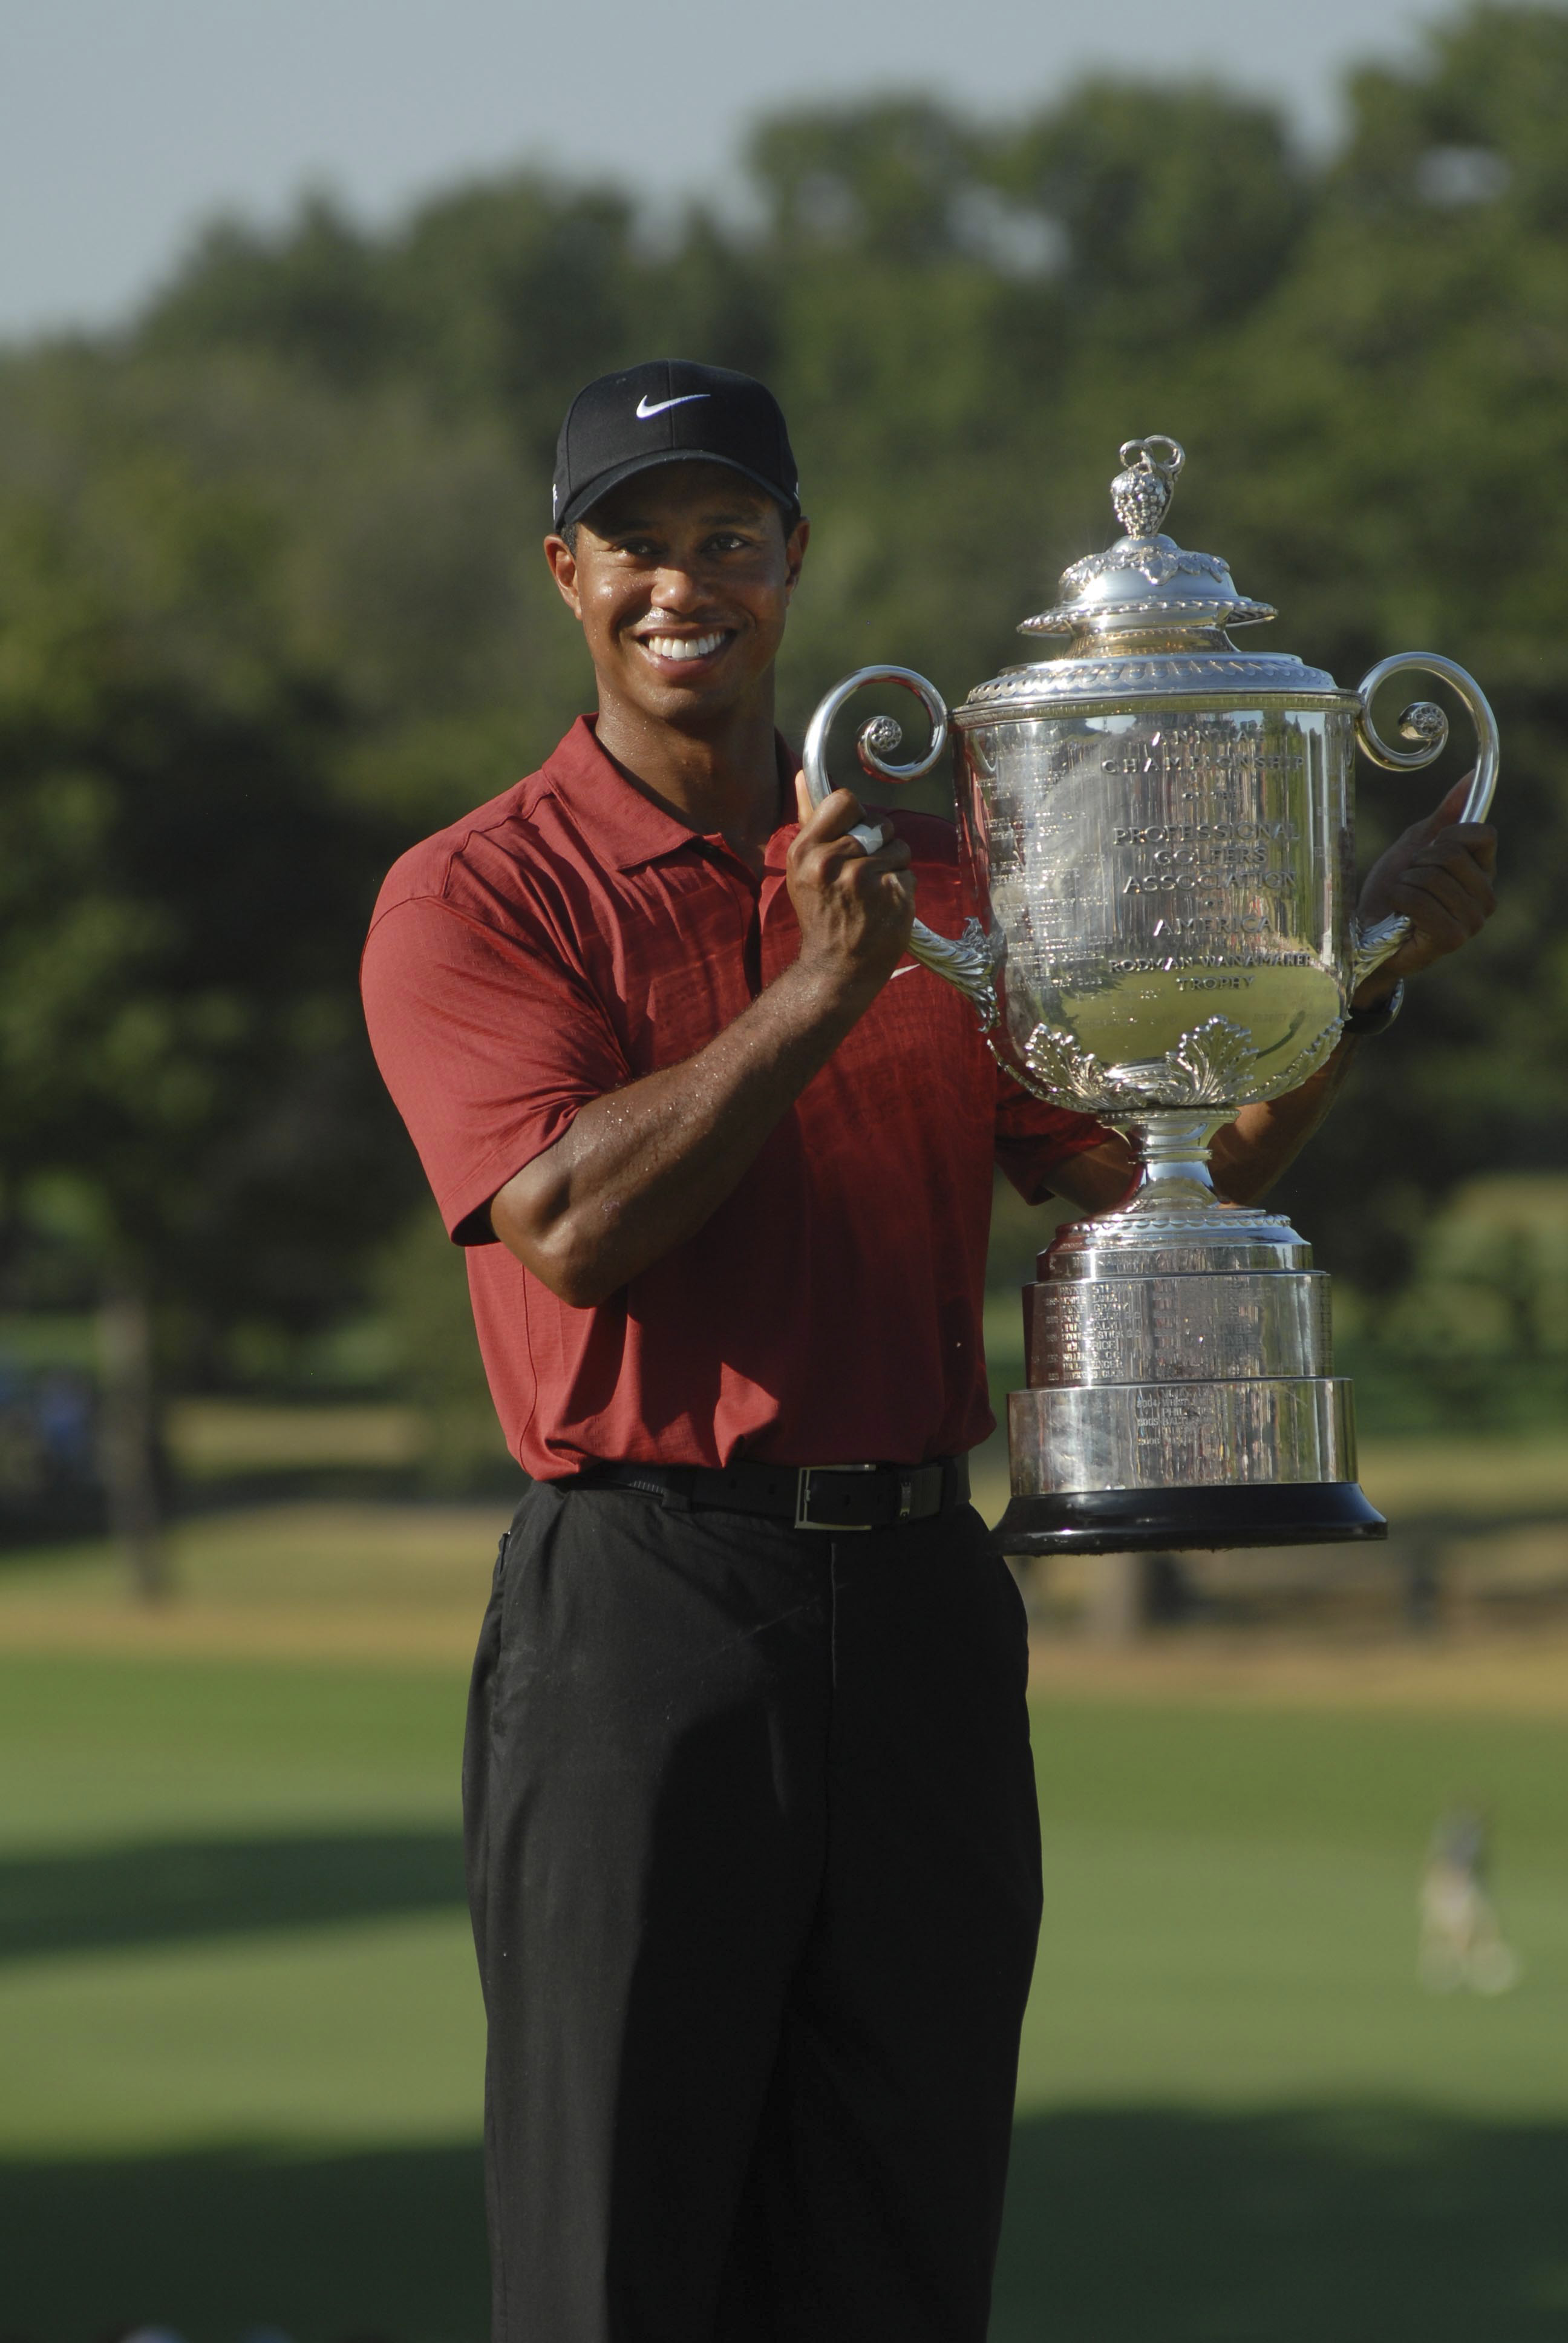 Woods has won the PGA Championship four times, most recently in 2007